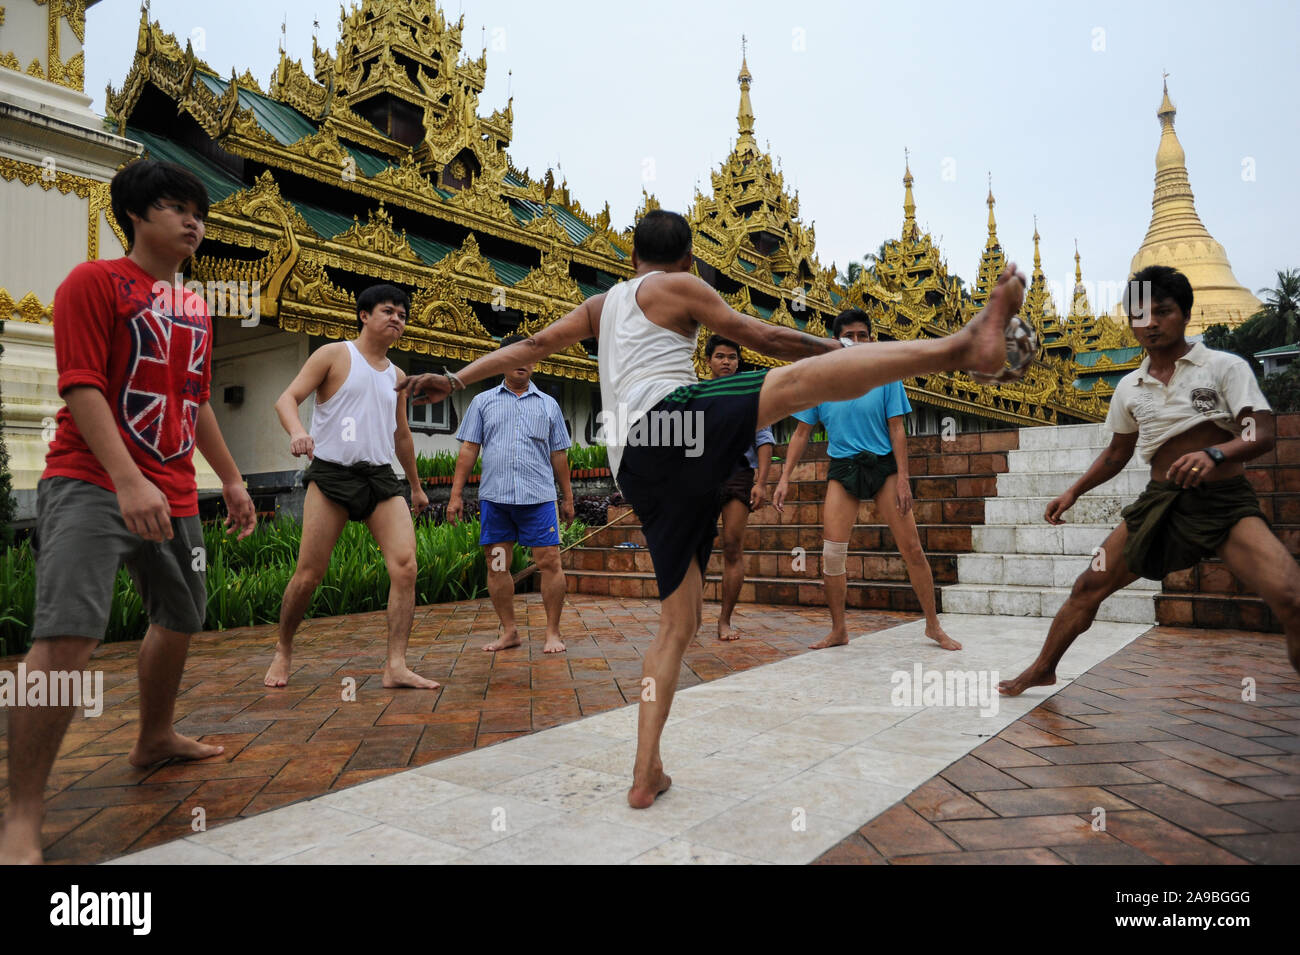 25.08.2013, Yangon, , Myanmar - A group of men plays in front of the temple area of the Shwedagon pagoda Chinlone. The game is the national sport of t Stock Photo